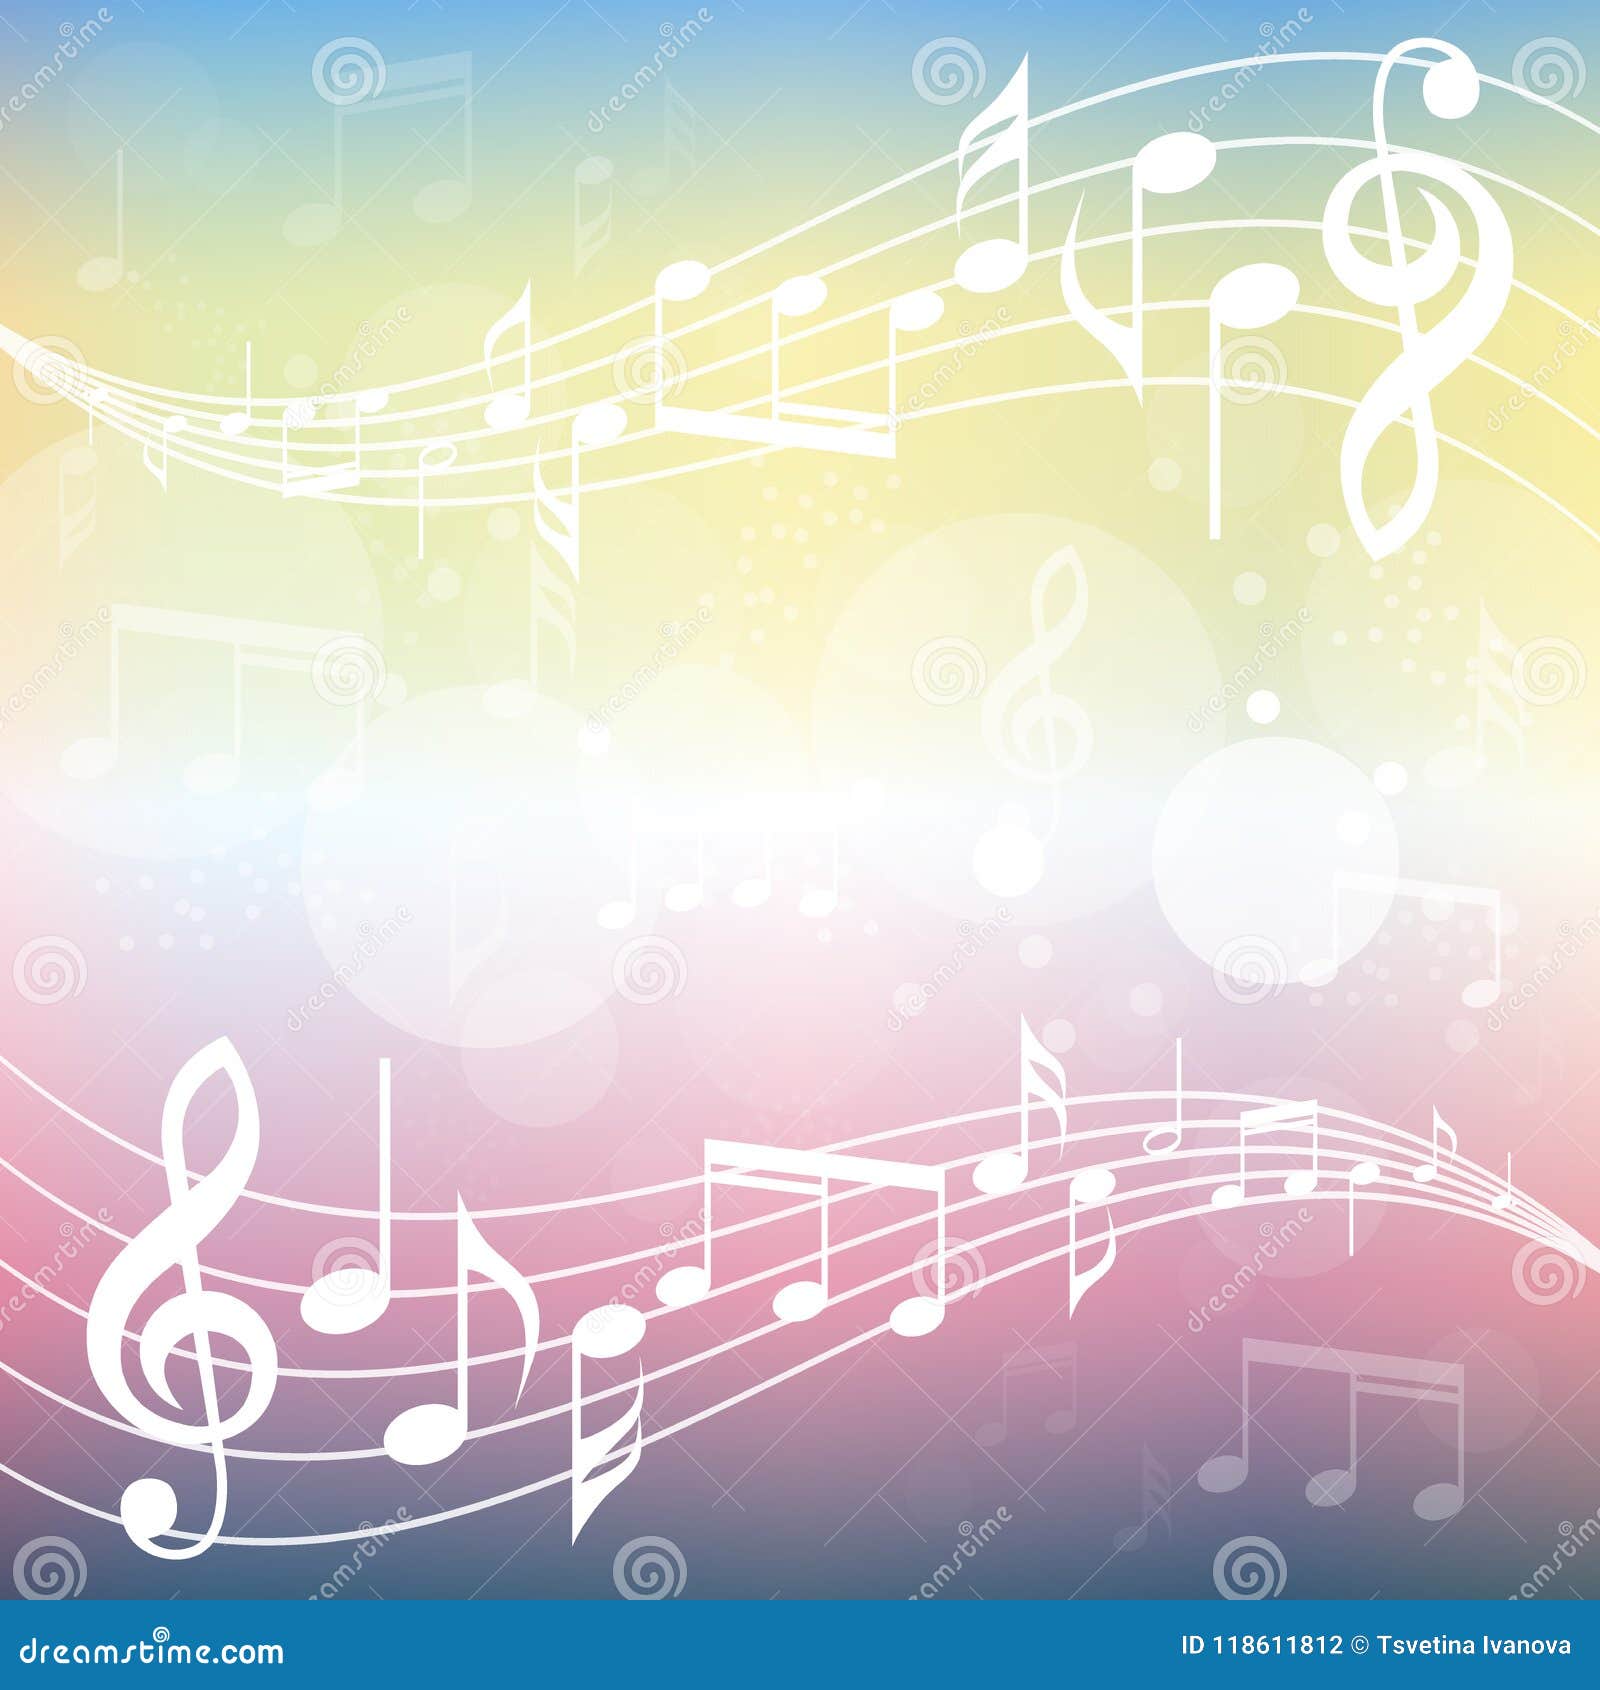 Colorful Gradient Music Background Illustration. Curved Stave With Music  Notes Background Stock Vector - Illustration Of Wallpaper, Musical:  118611812